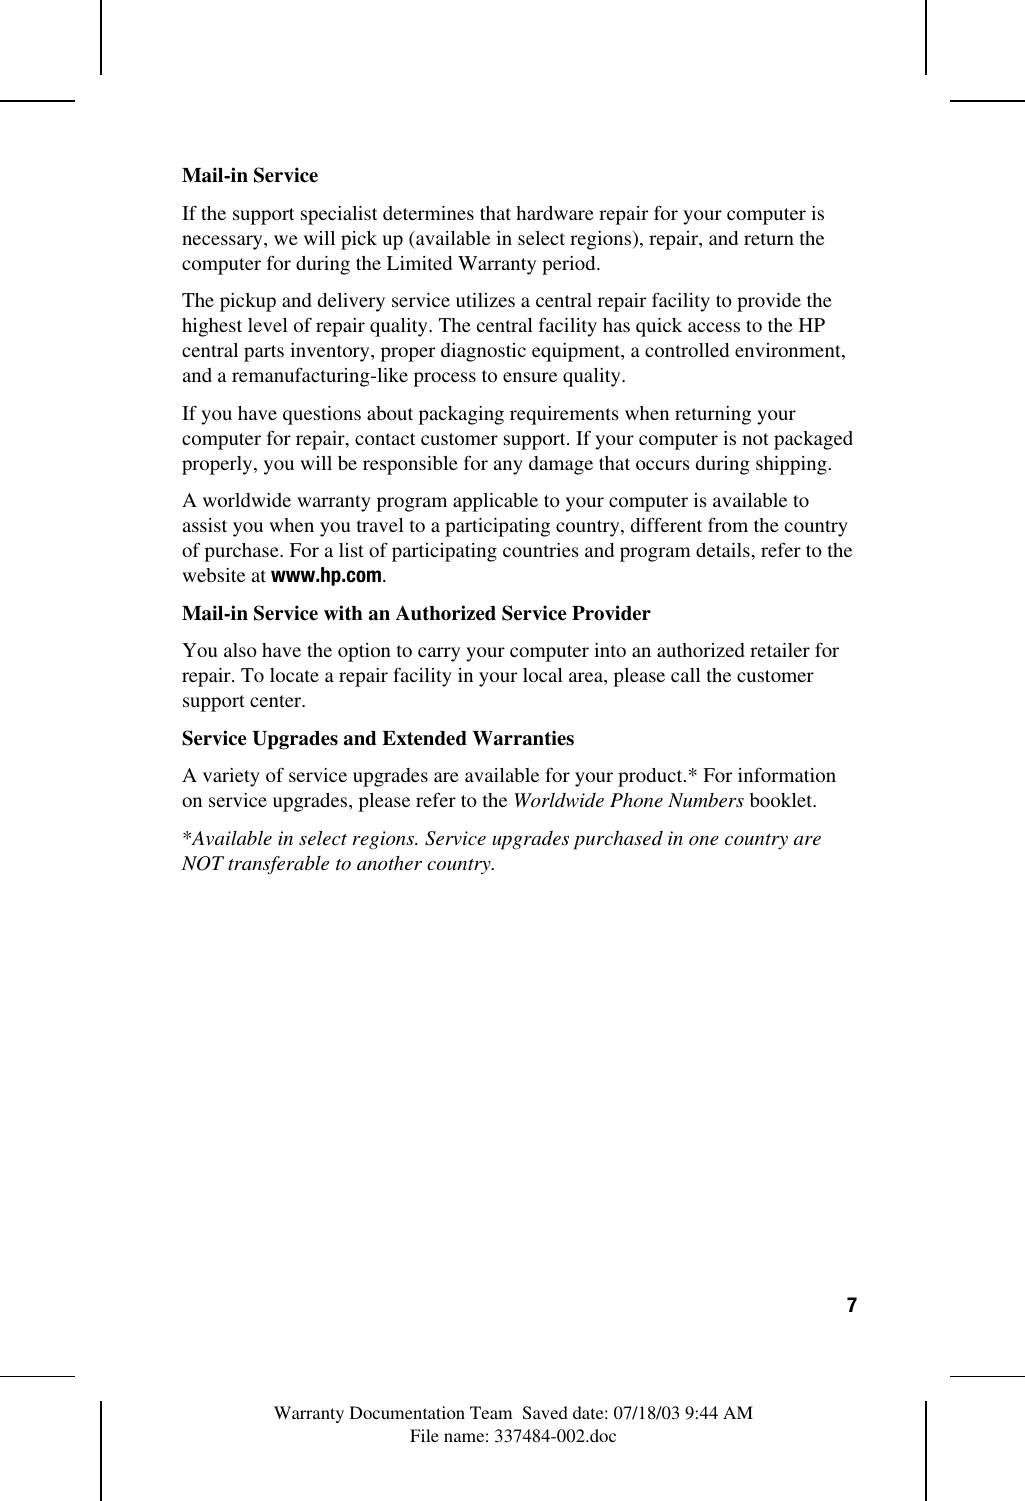 Page 8 of 9 - HP Notebook Products Series - Worldwide Limited Warranty And Technical Support C00047034